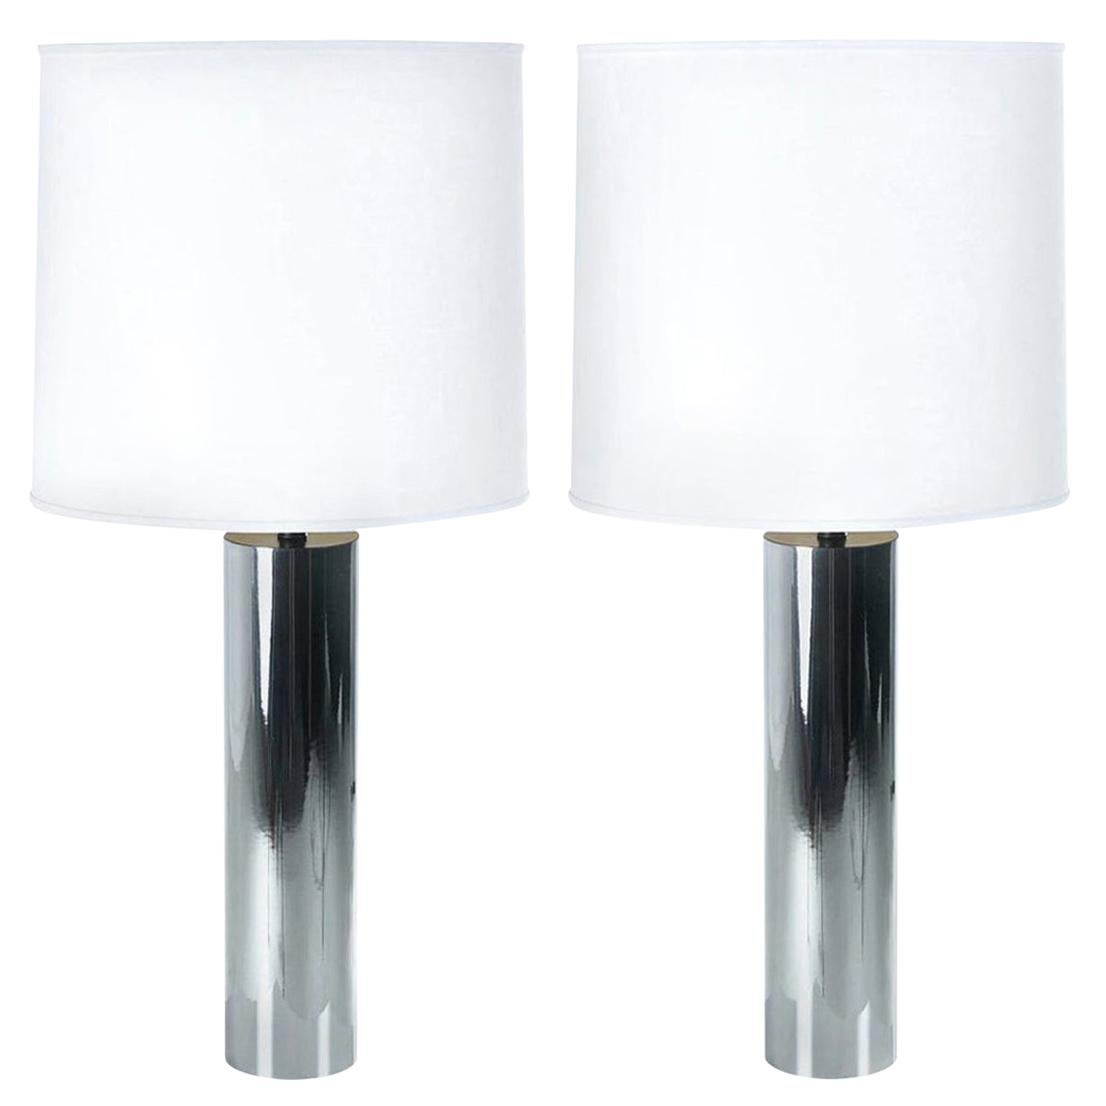 Tall George Kovacs Style Minimalist Chrome Cylinder Table Lamps with Shades